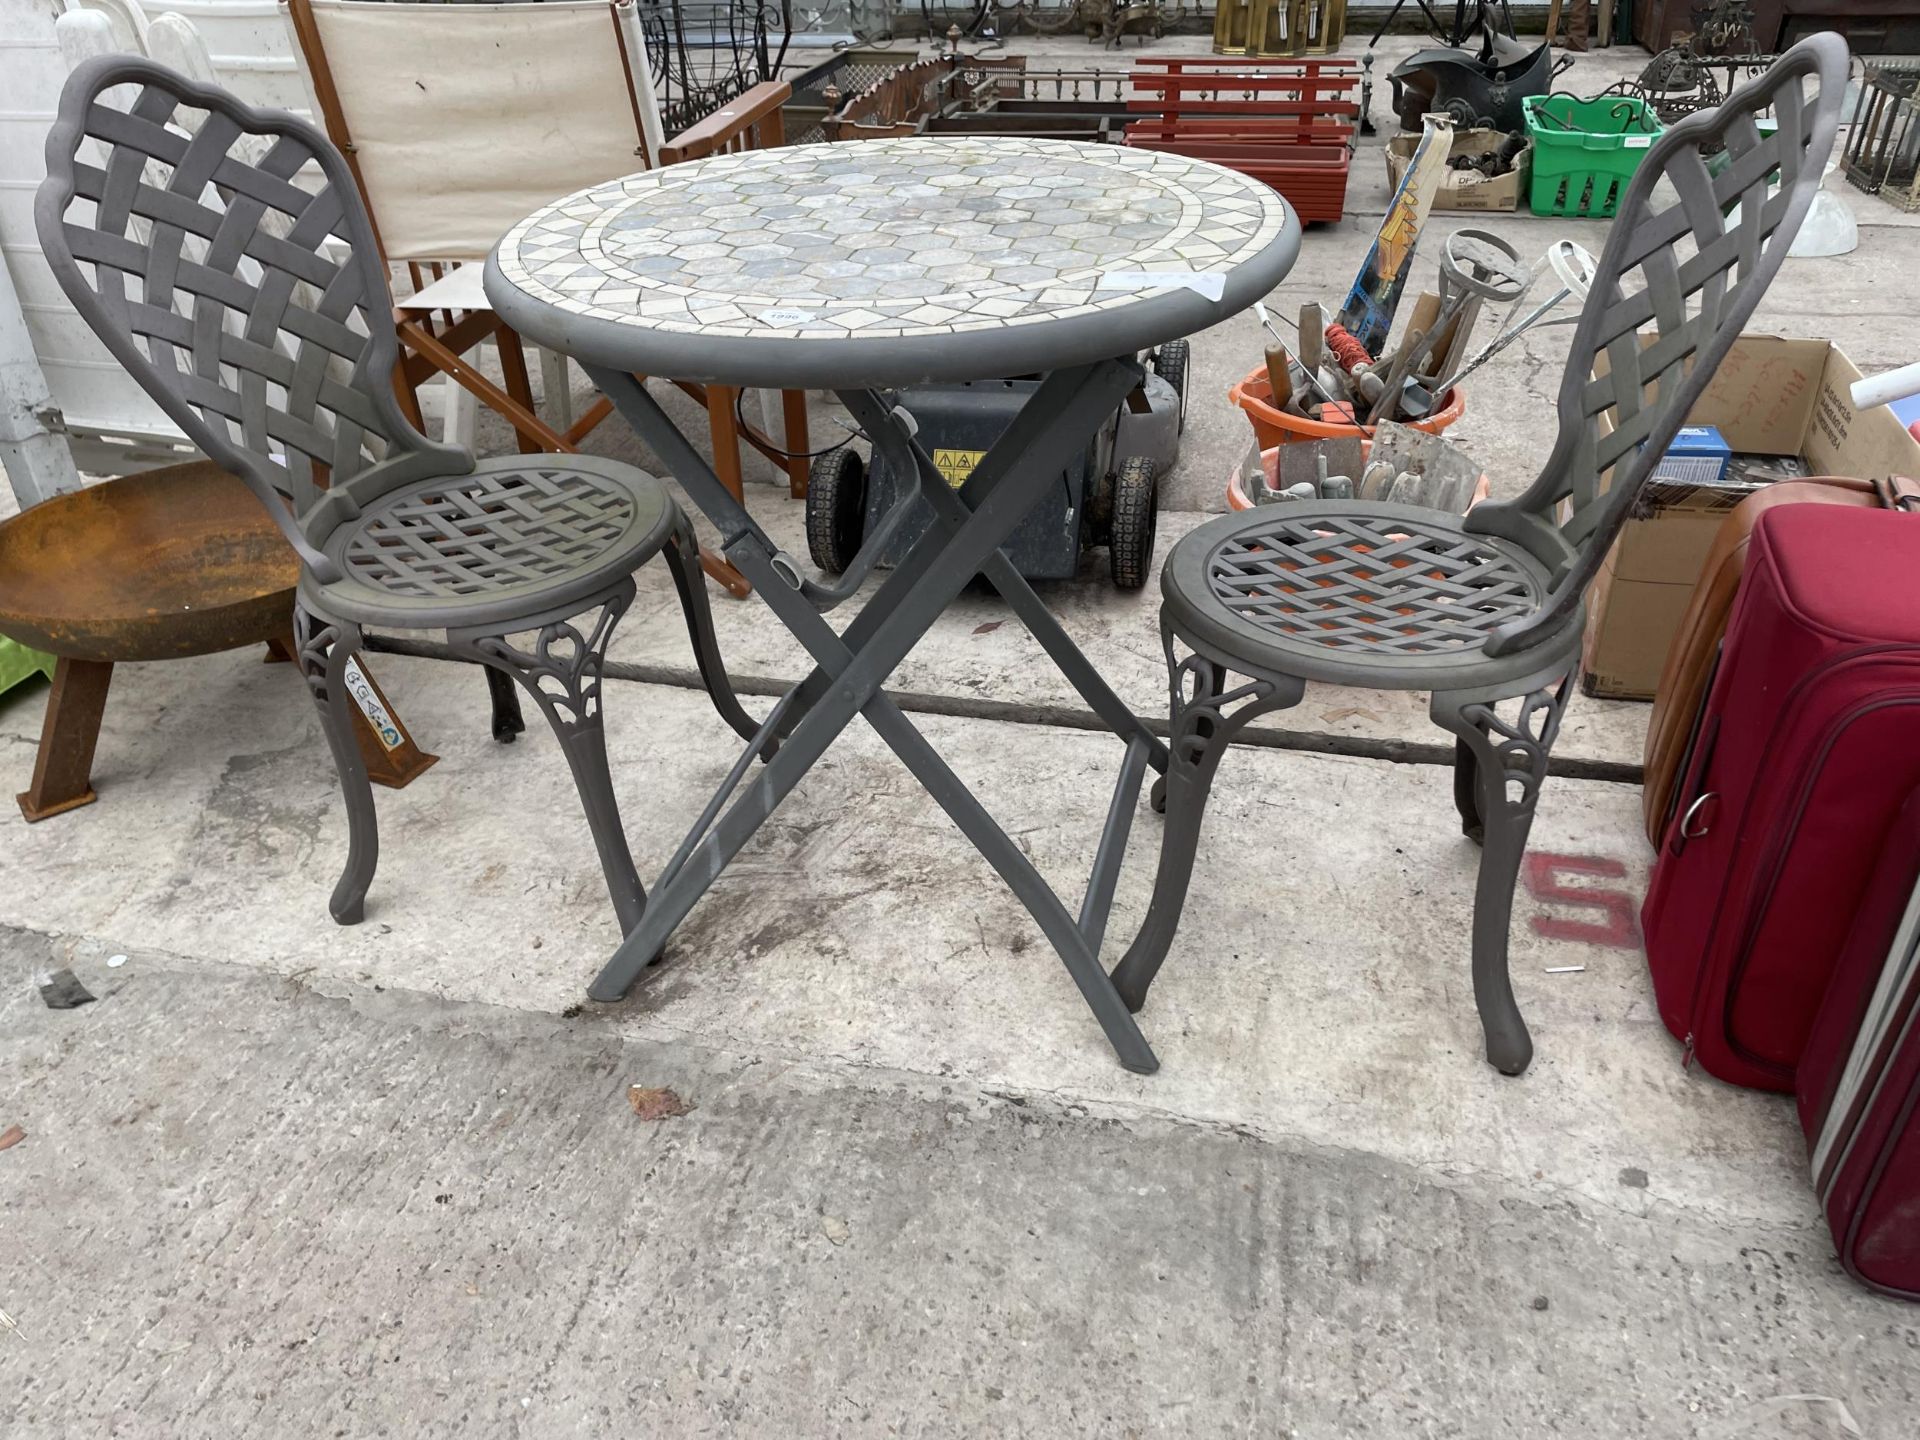 A METAL BISTRO SET COMPRISNG OF TWO CHAIRS AND A TILE TOP TABLE - Image 2 of 3